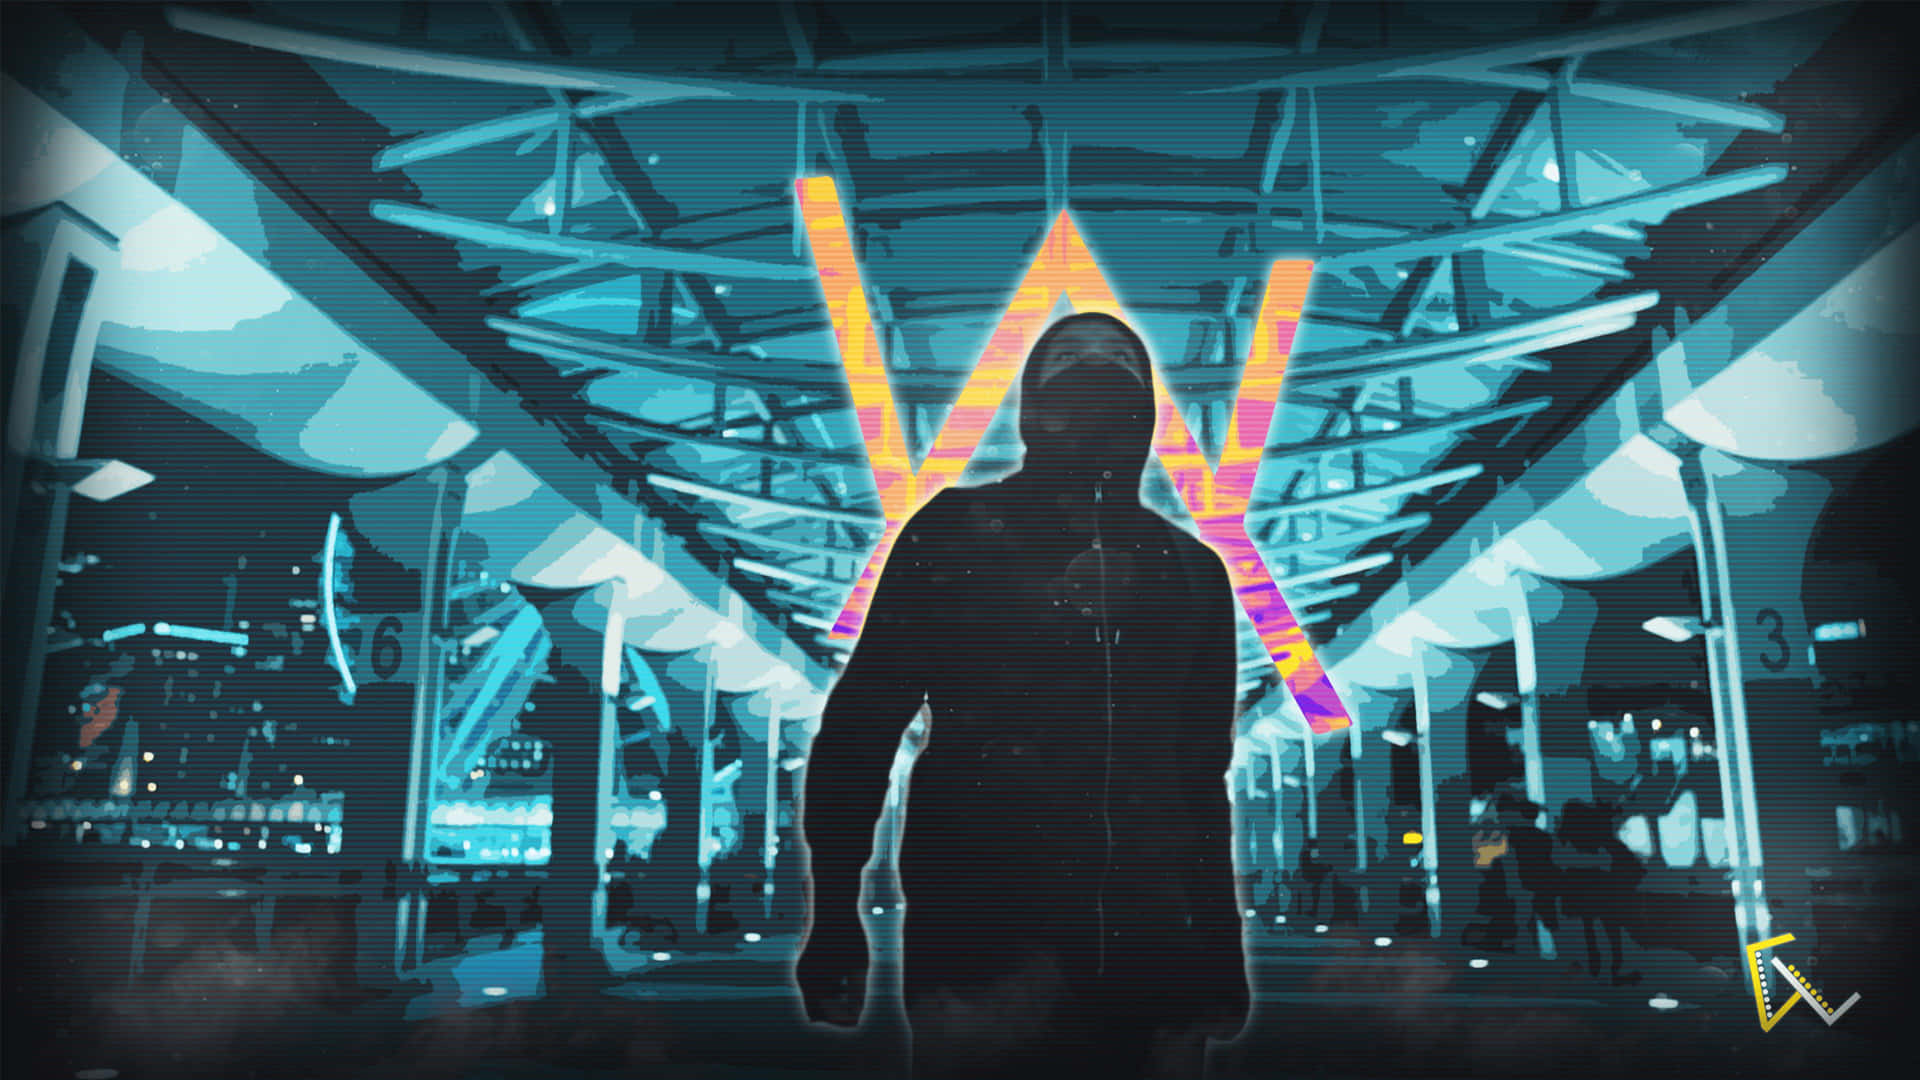 Alan Walker performing on stage with a captivating light show